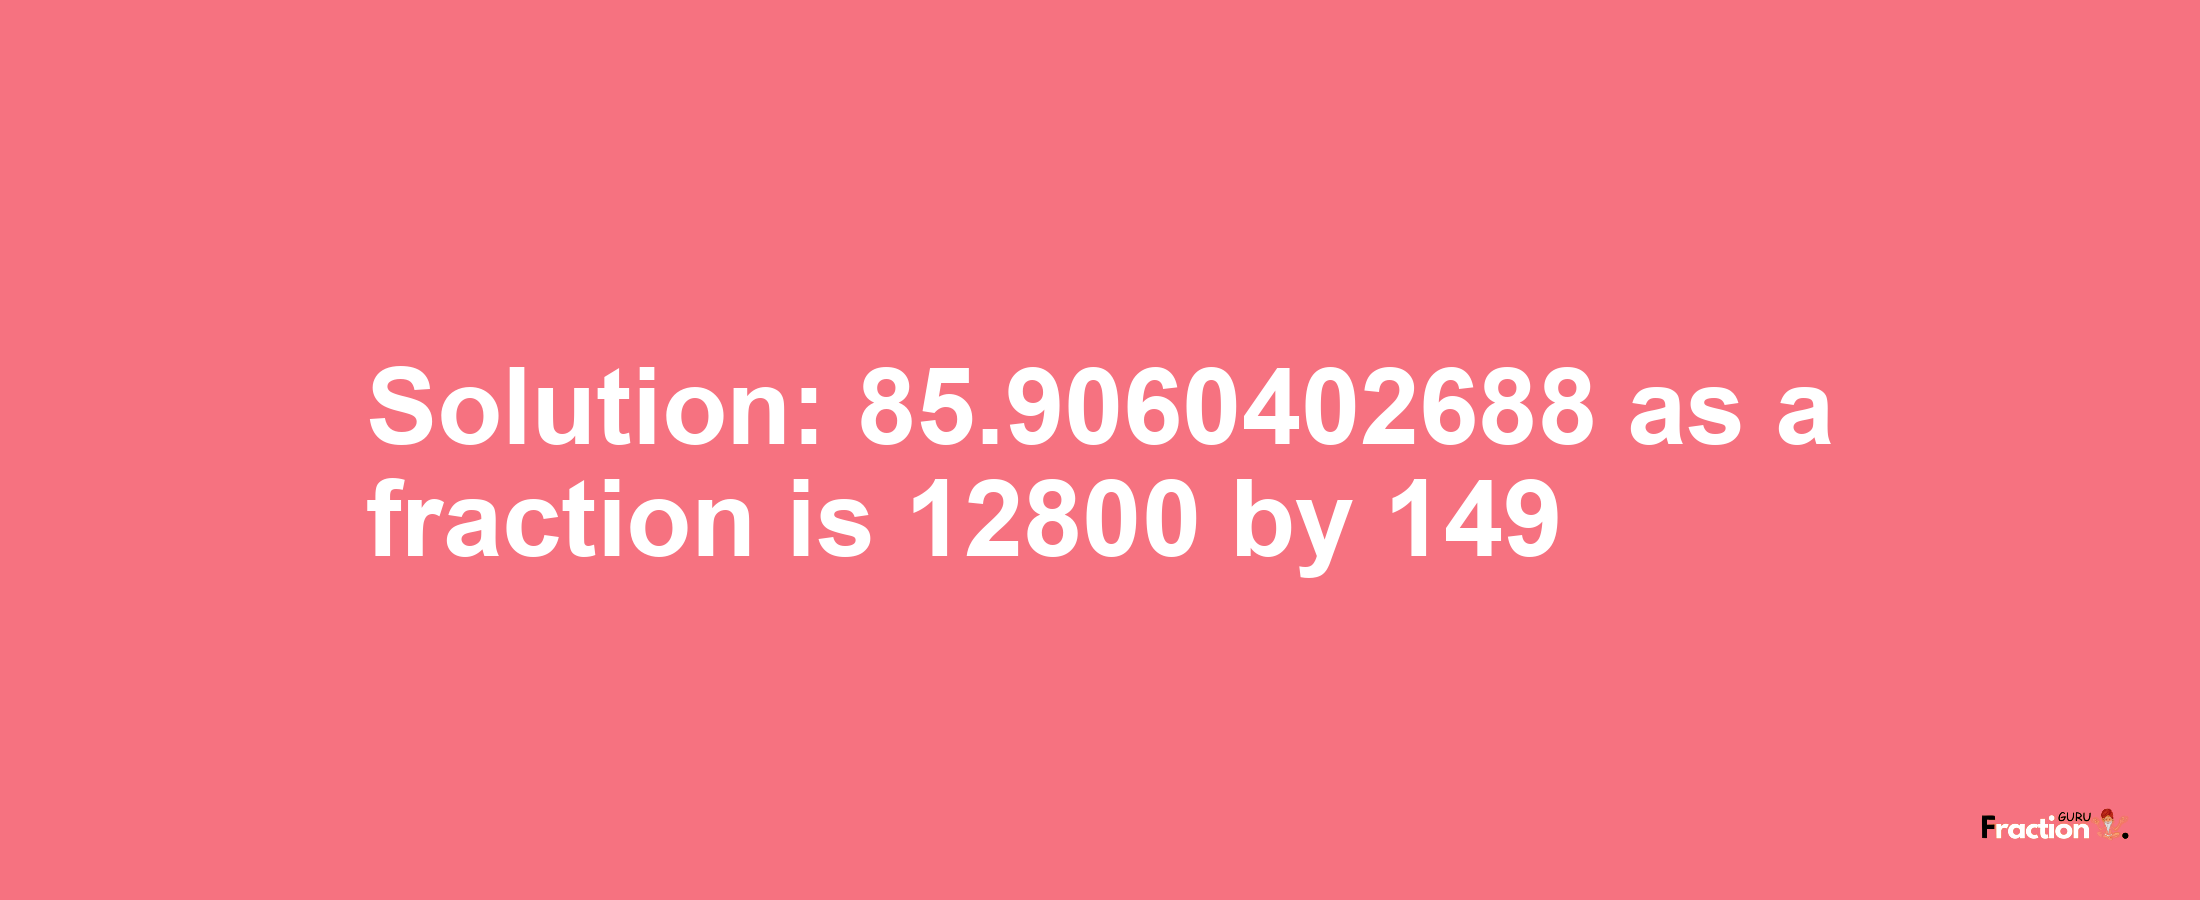 Solution:85.9060402688 as a fraction is 12800/149